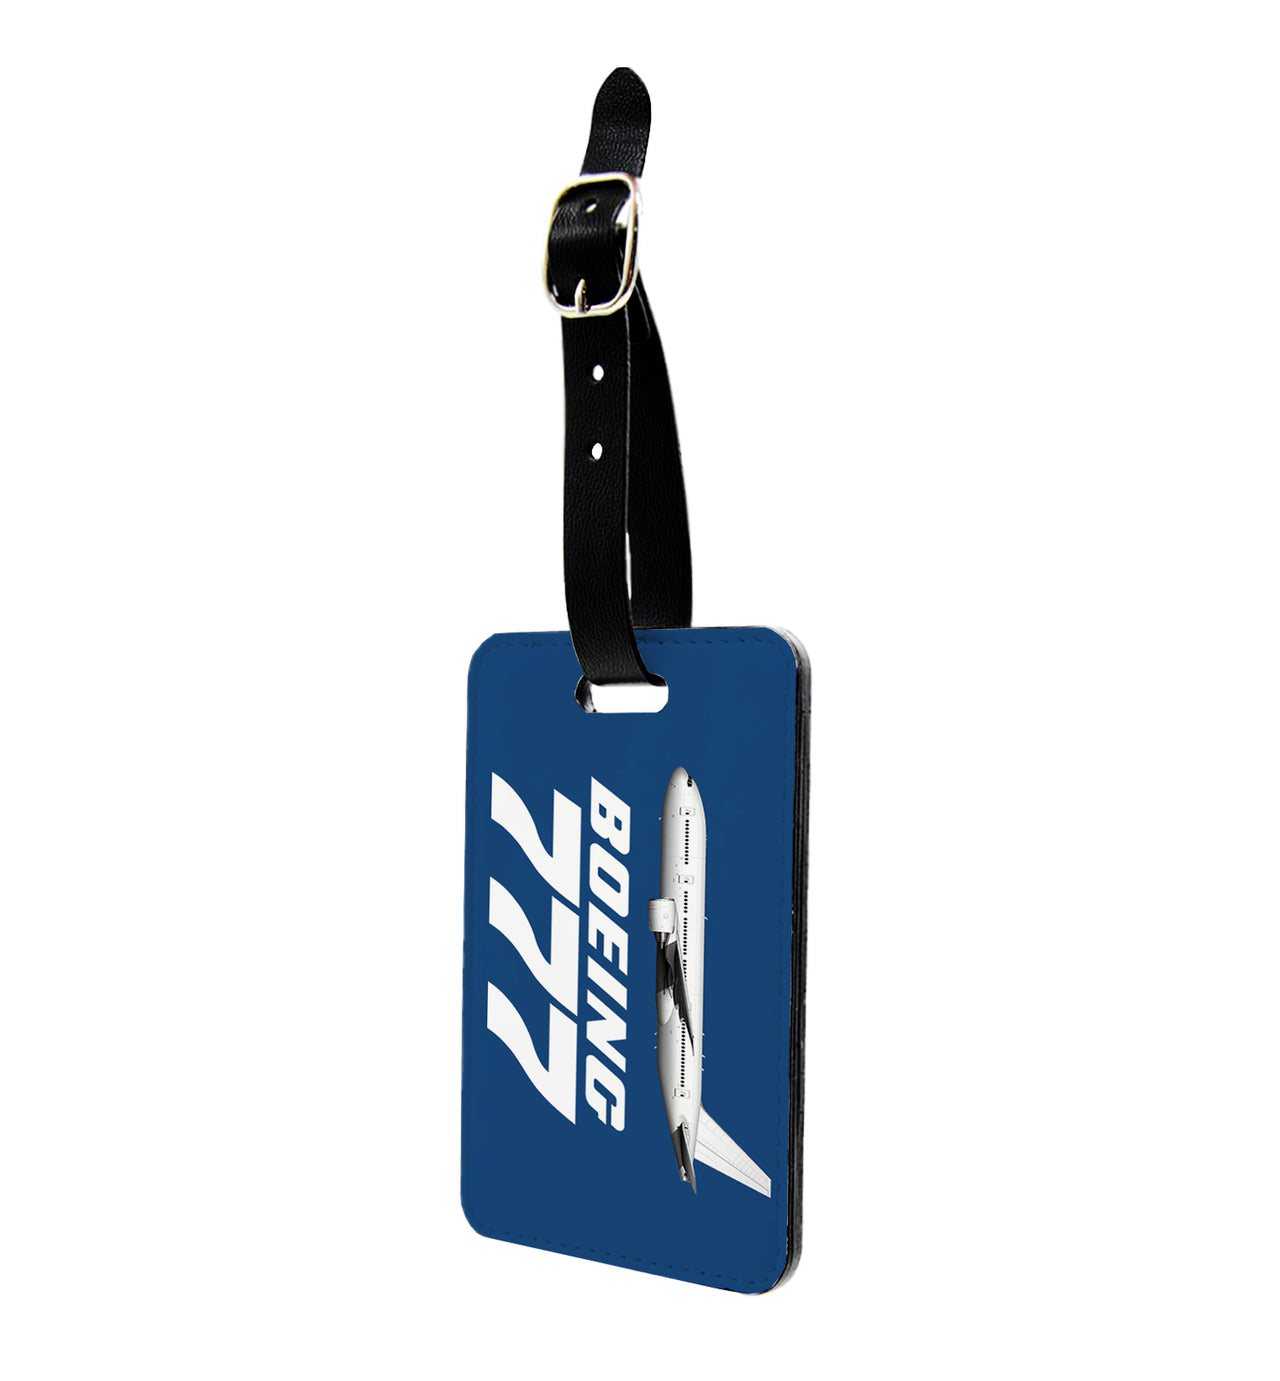 The Boeing 777 Designed Luggage Tag